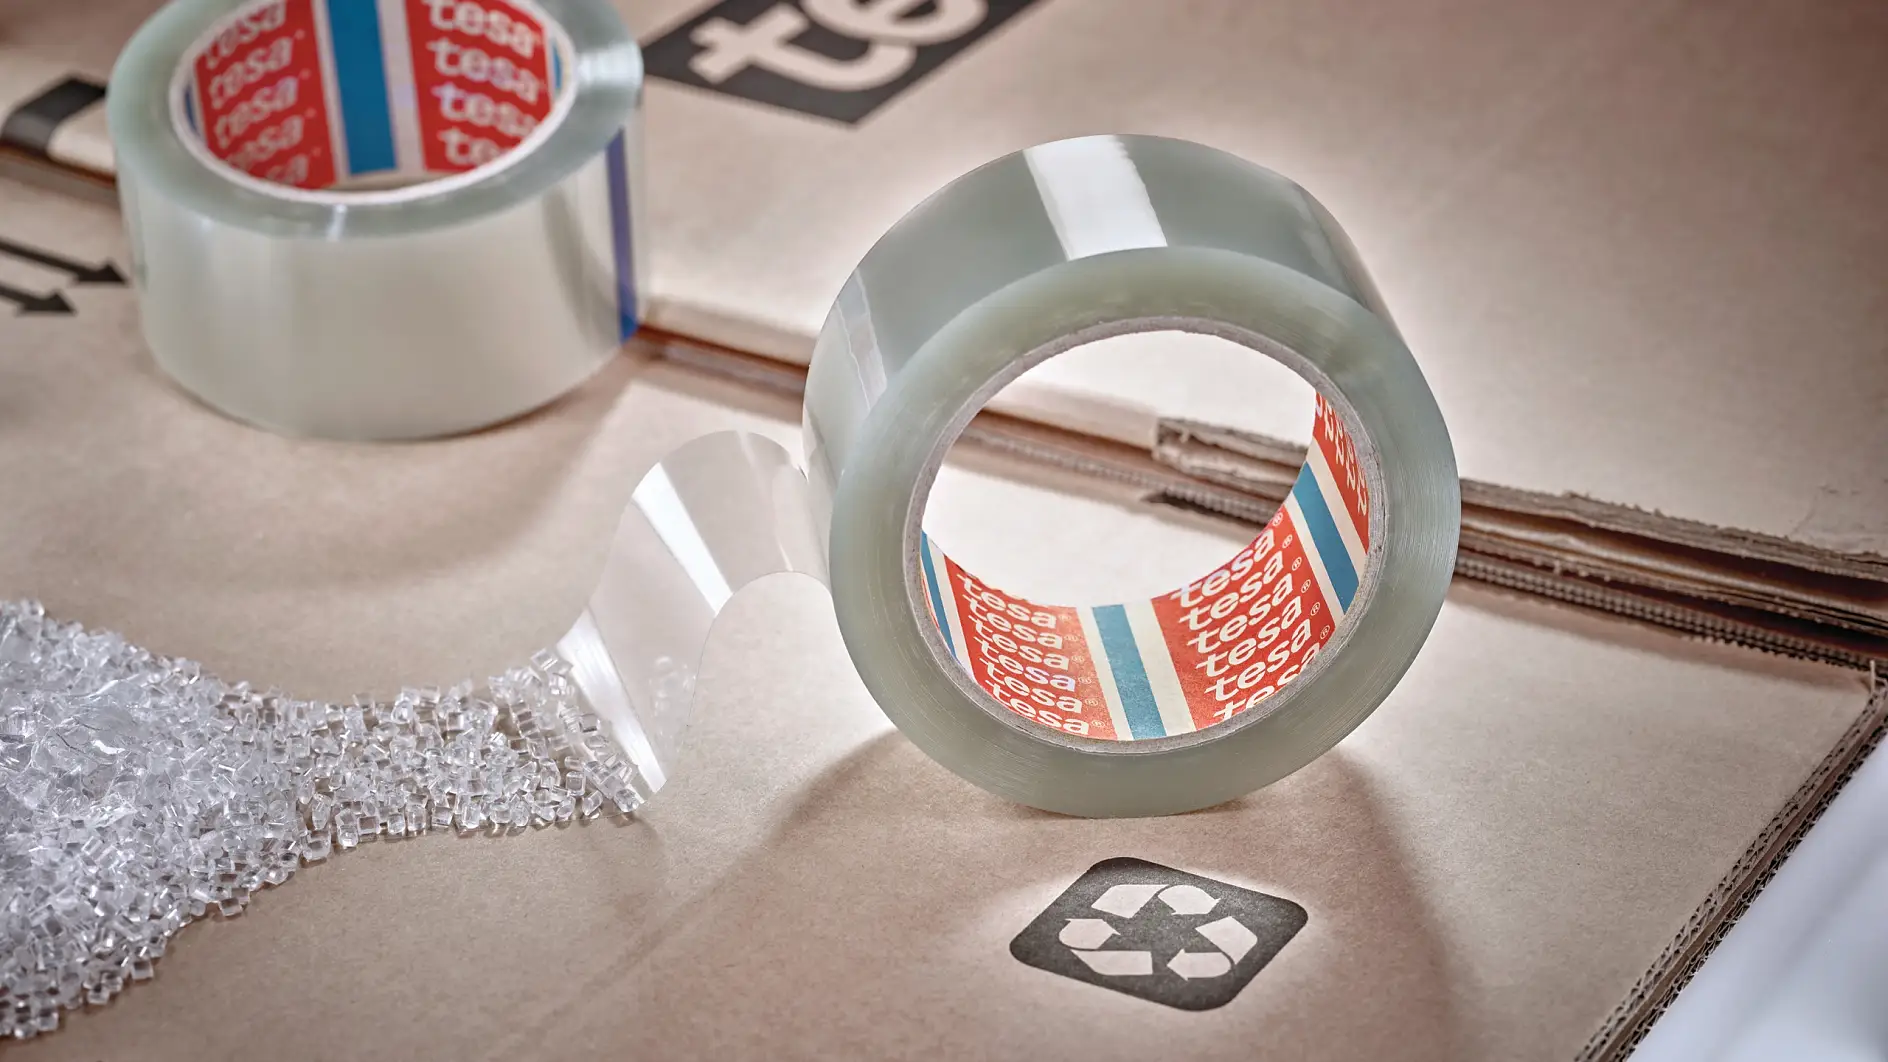 tesa is developing new, more sustainable packaging tapes that can be disposed of together with the cardboard.